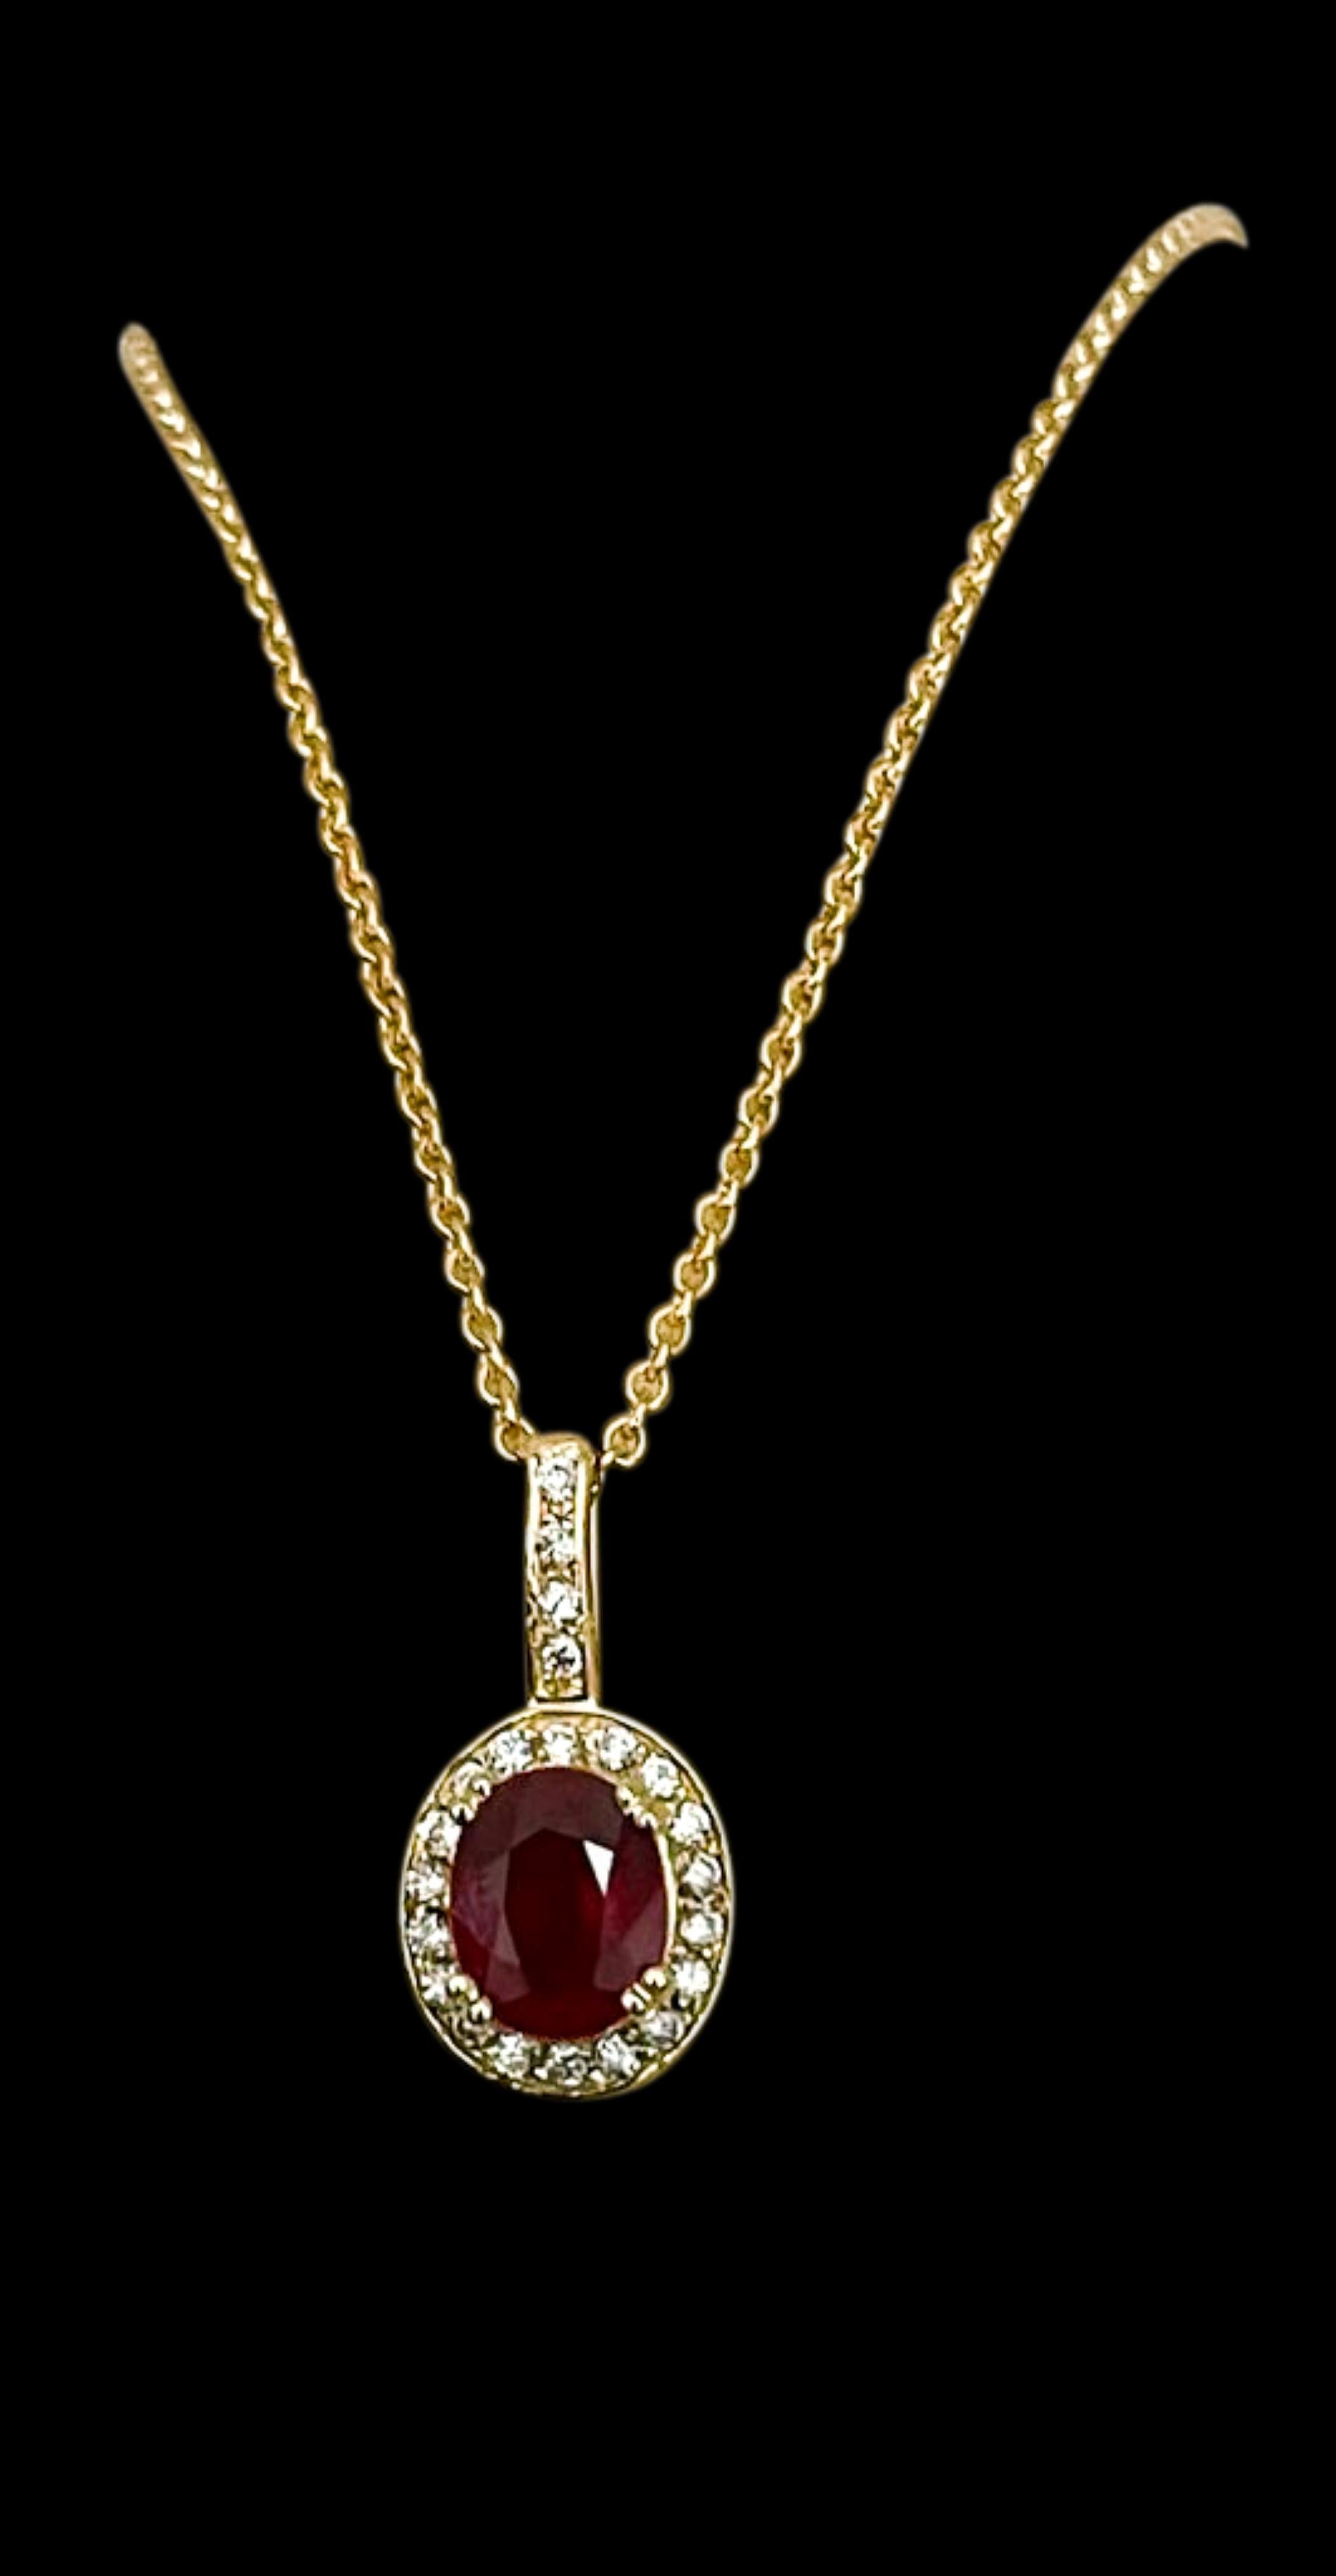 Approximately 3.5  ct Oval Cut Ruby Pendant or Necklace 14 Karat Yellow Gold with Chain 20 inches
This Simple yet elegant Necklace  consisting of a single Cushion shape Treated Ruby with a solid 14 Karat Yellow gold chain
Measurement of the stone